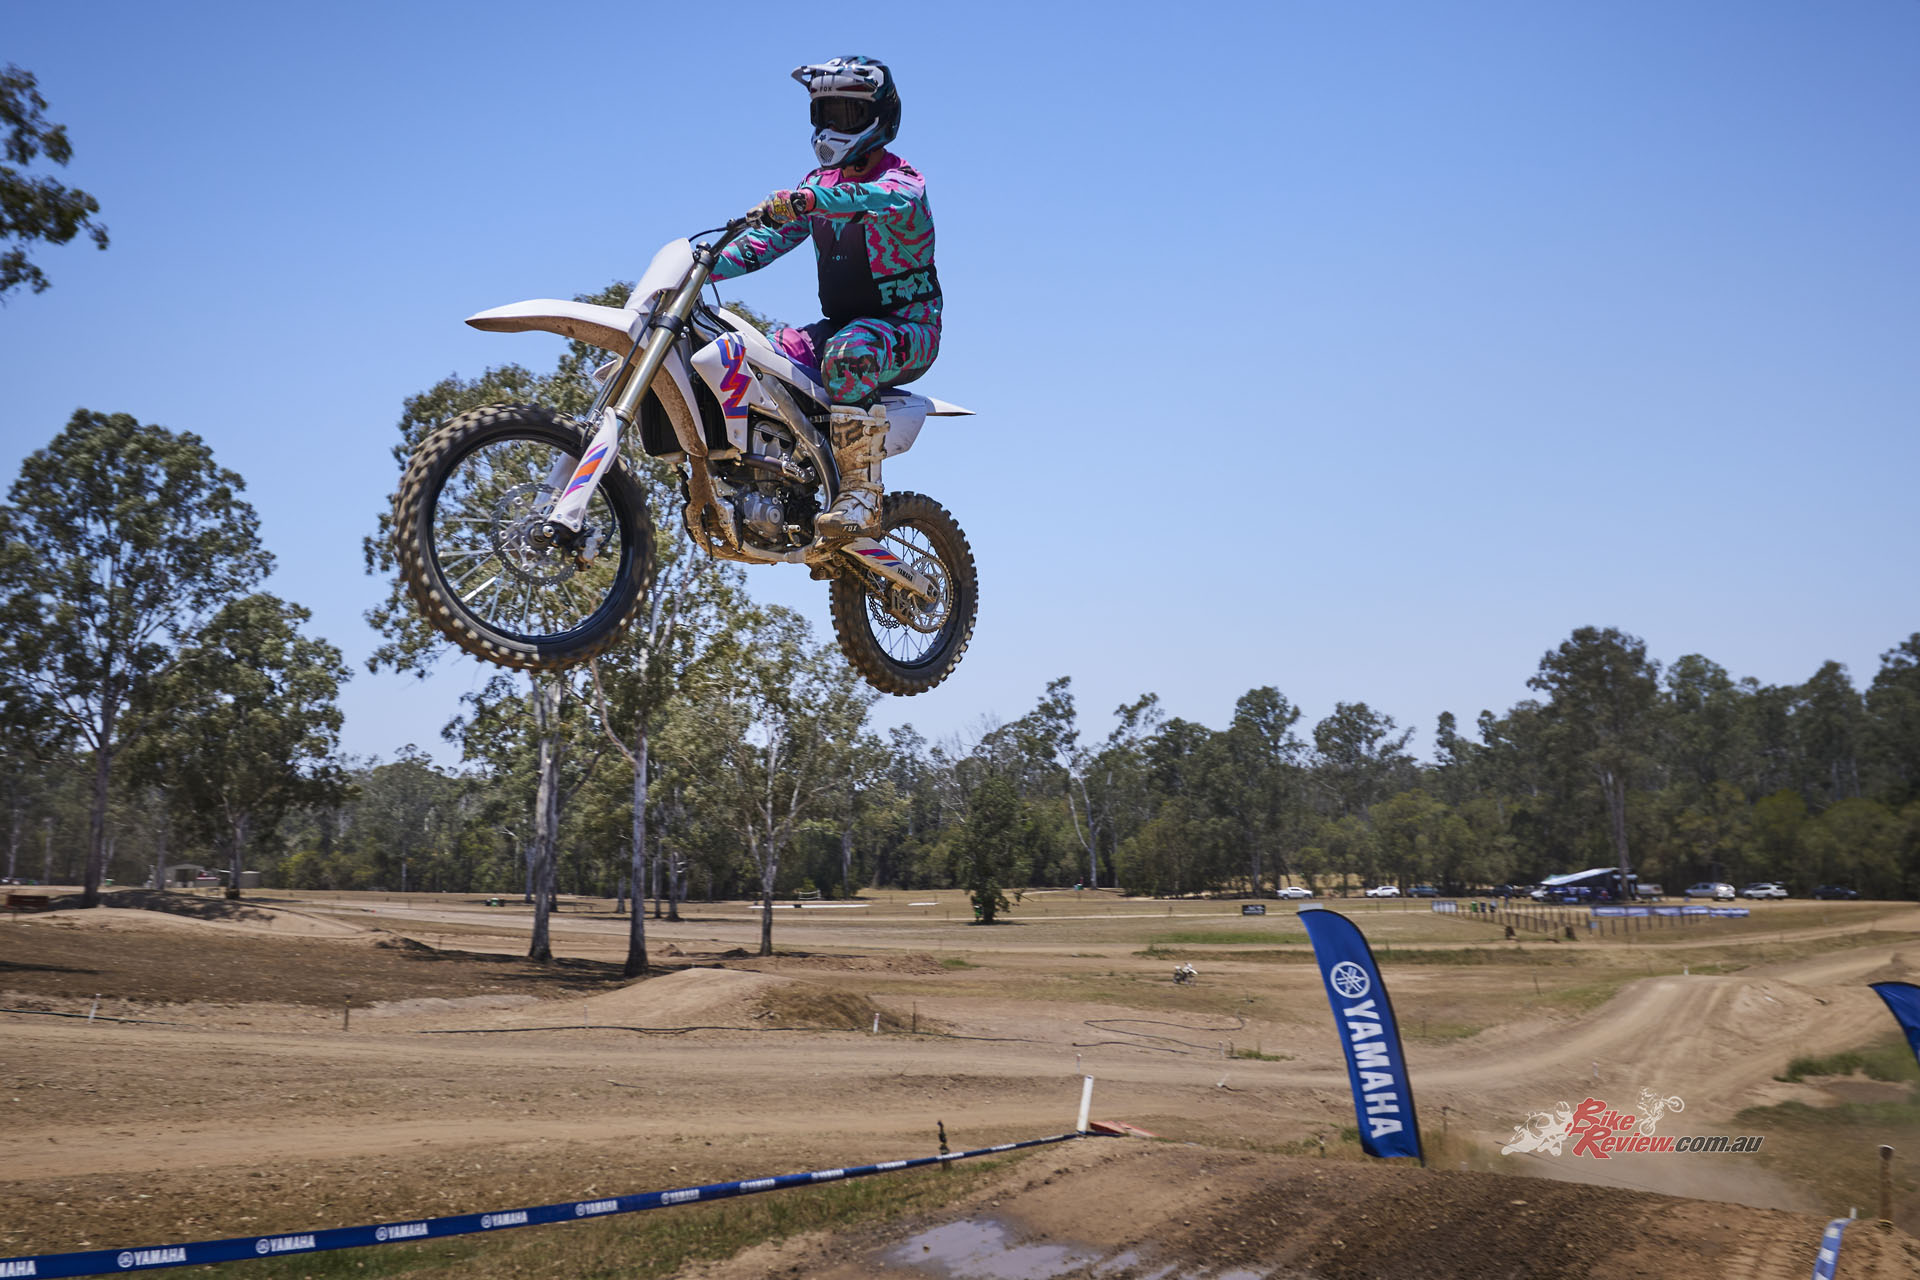 "MX Farm is a fantastic facility to test out the YZ250F with wide open sections, twisty corners, and big jumps."